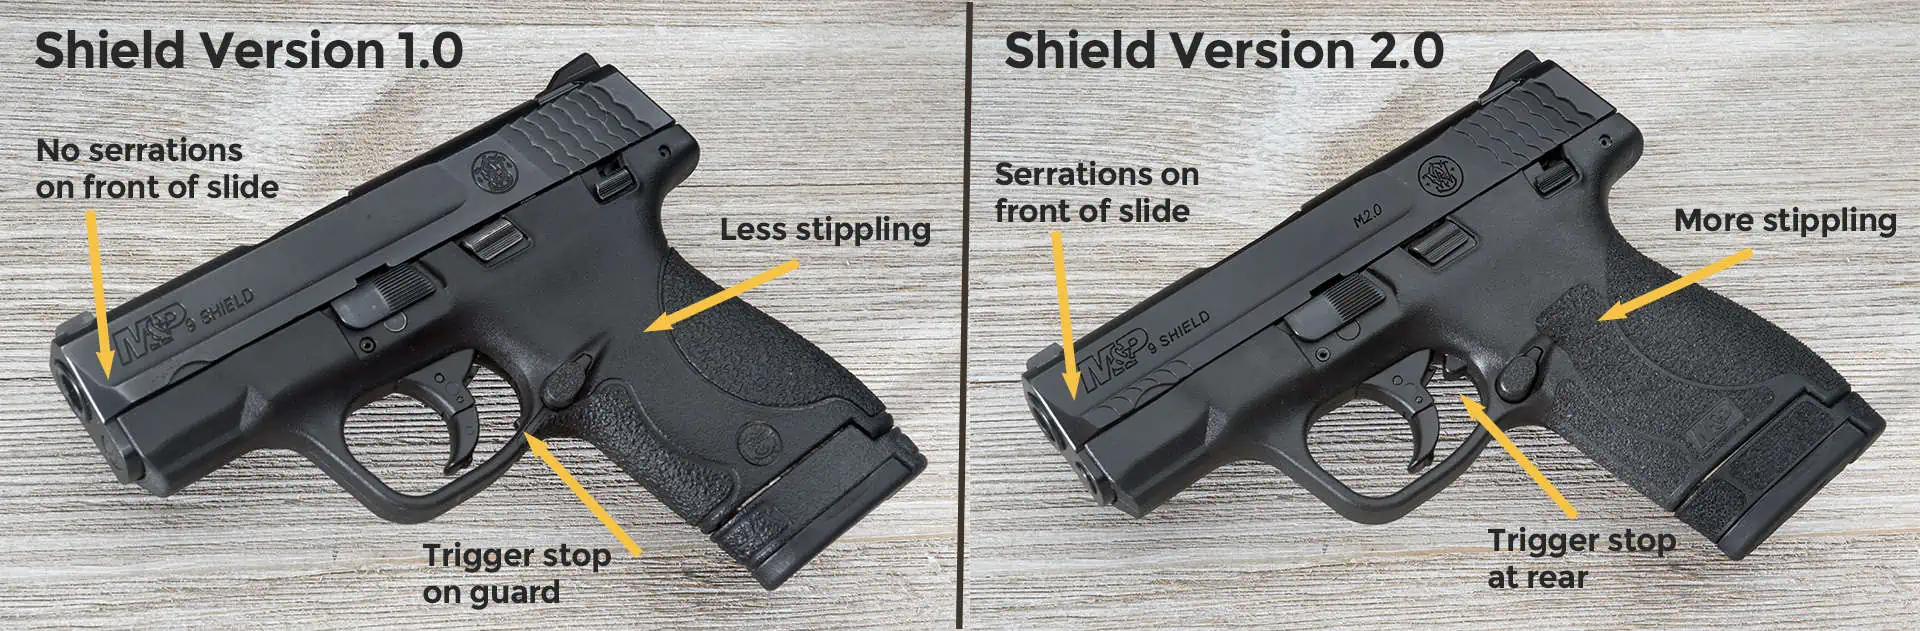 Comparing features on the Shield 1.0 versus Shield 2.0